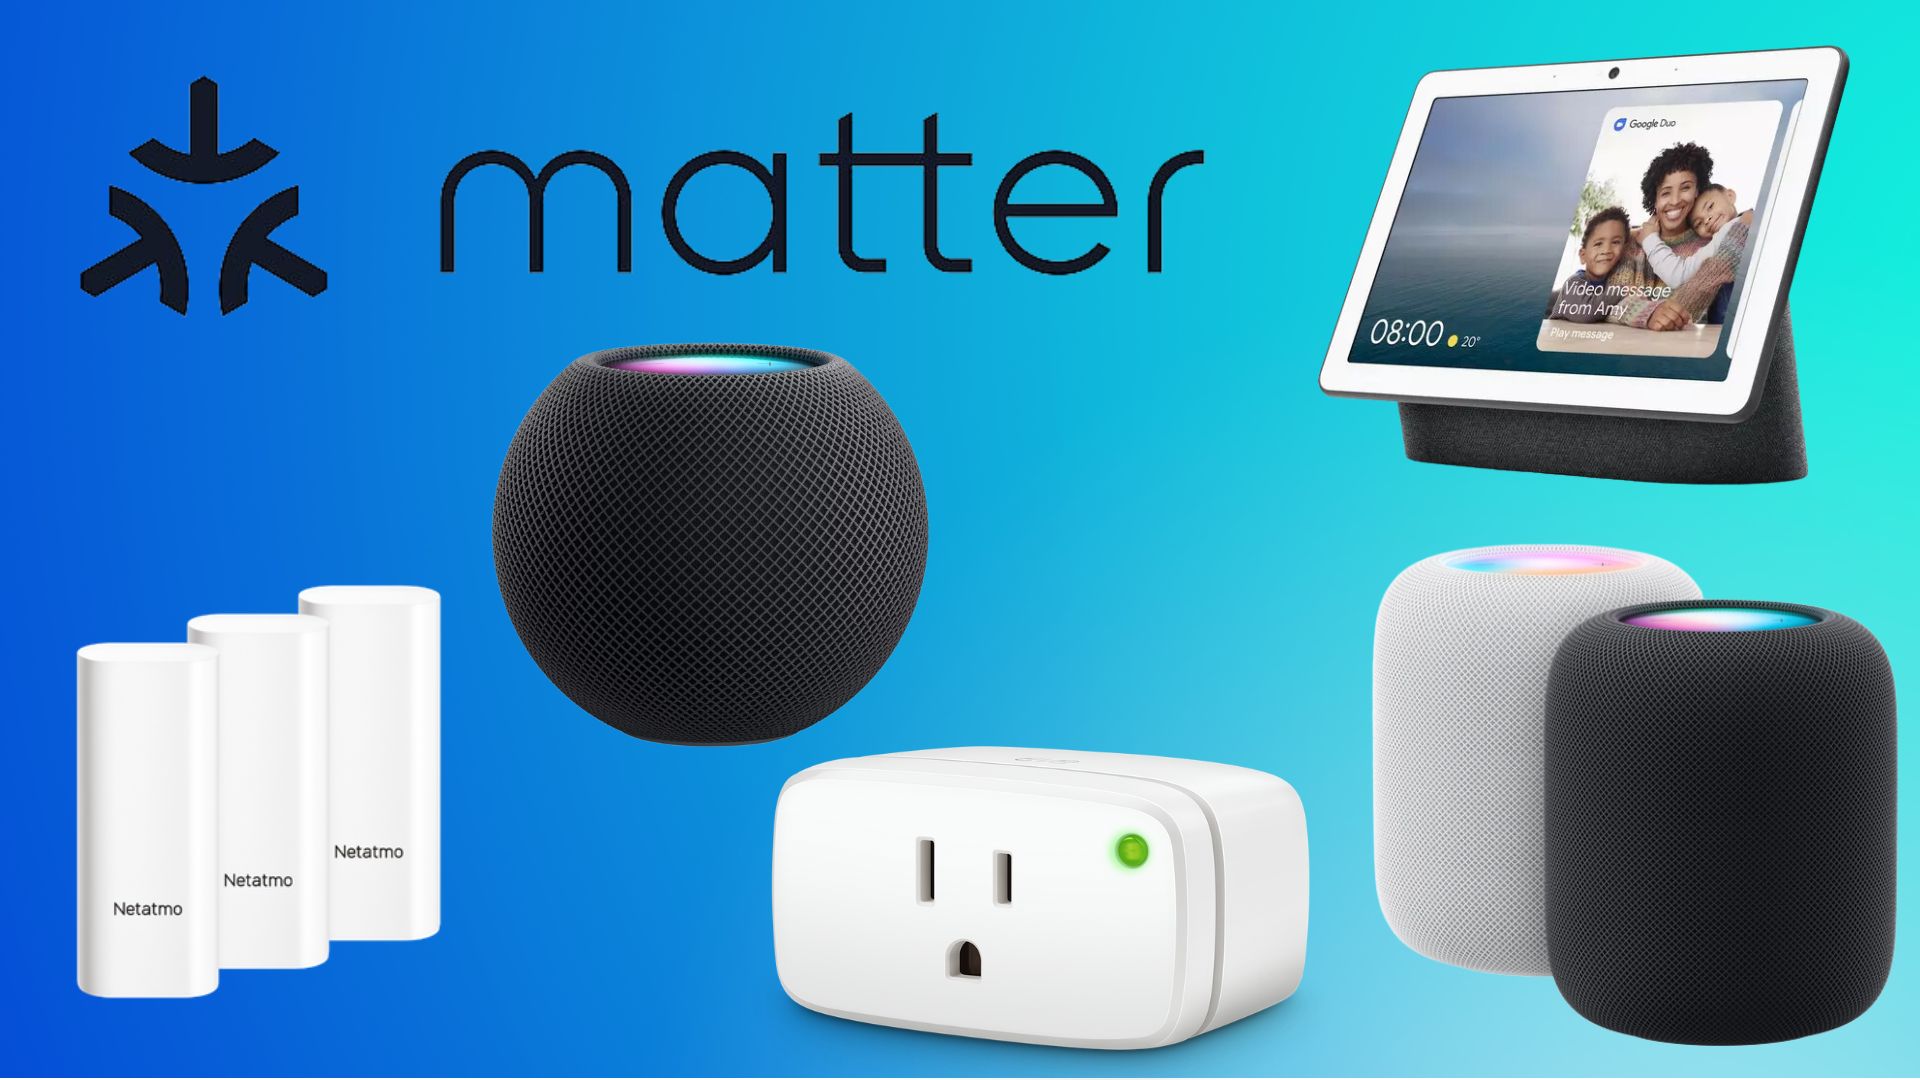 Current Echo smart speakers and displays will support Matter